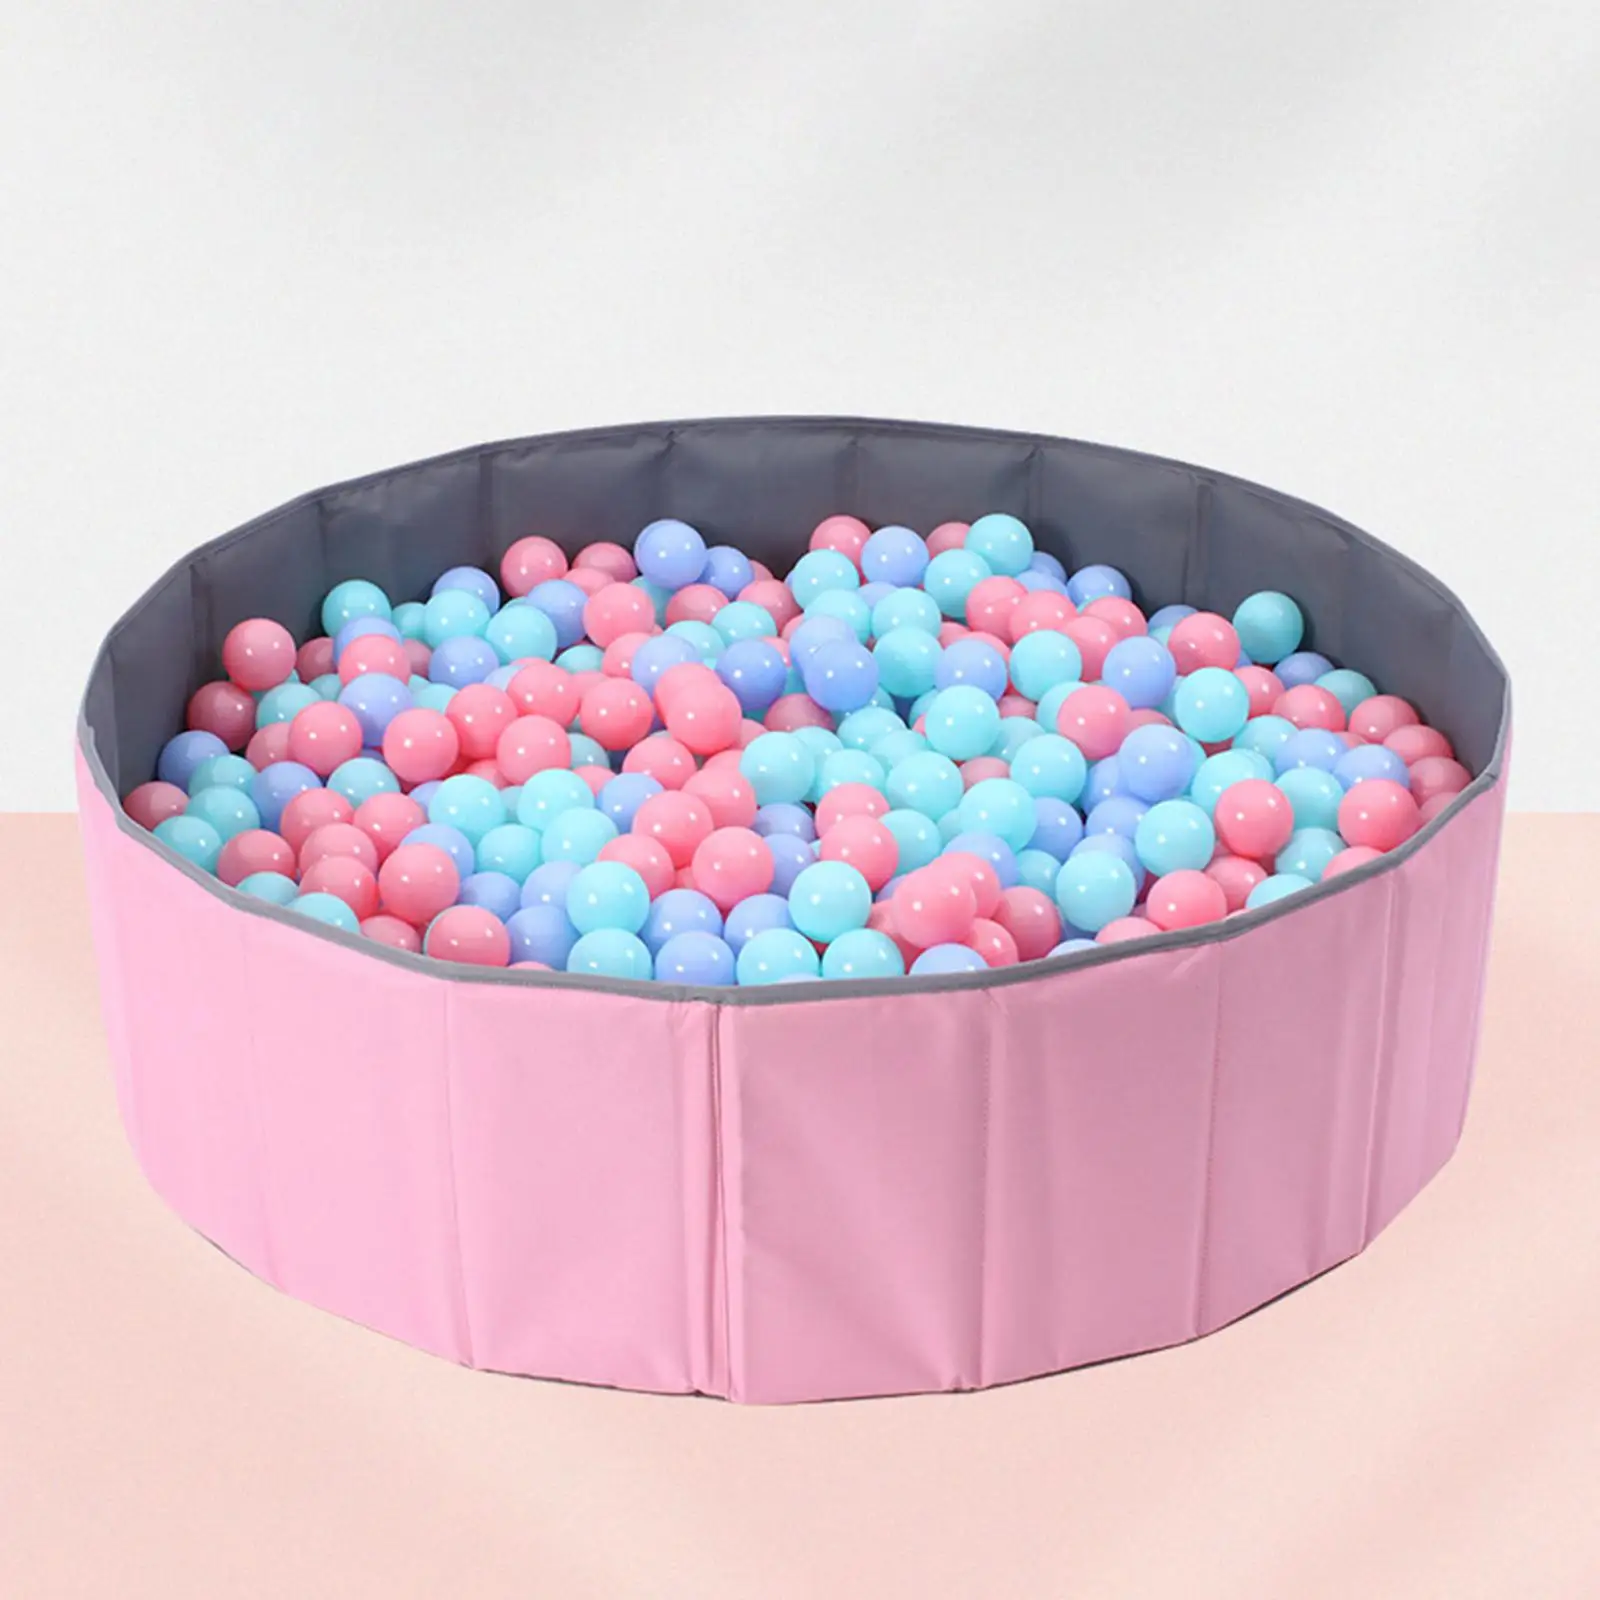 Sea Balls Pools No Need Inflate Play Activity Center Easy Installation Toy Pools